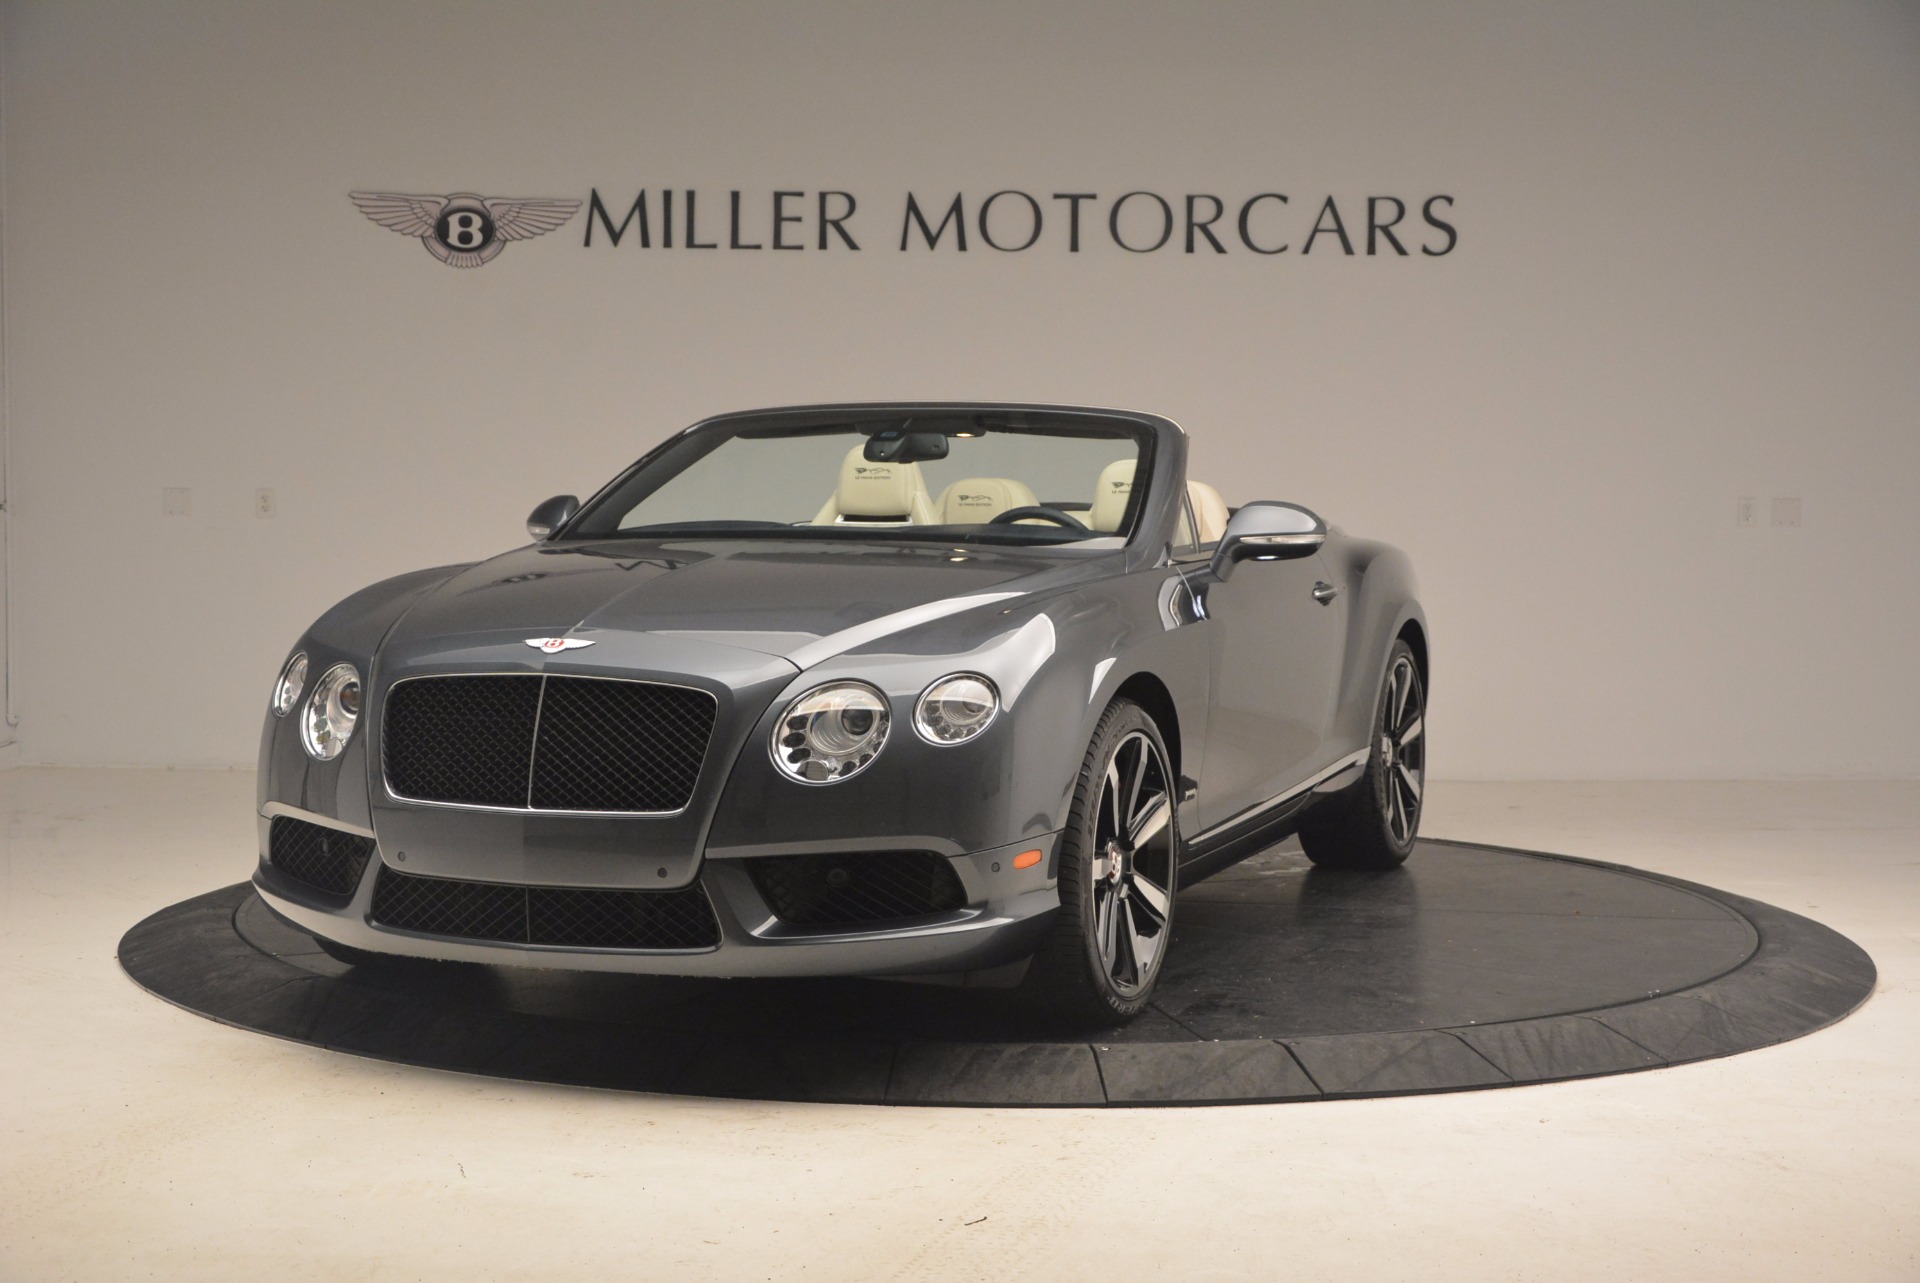 Used 2013 Bentley Continental GT V8 Le Mans Edition, 1 of 48 for sale Sold at Rolls-Royce Motor Cars Greenwich in Greenwich CT 06830 1